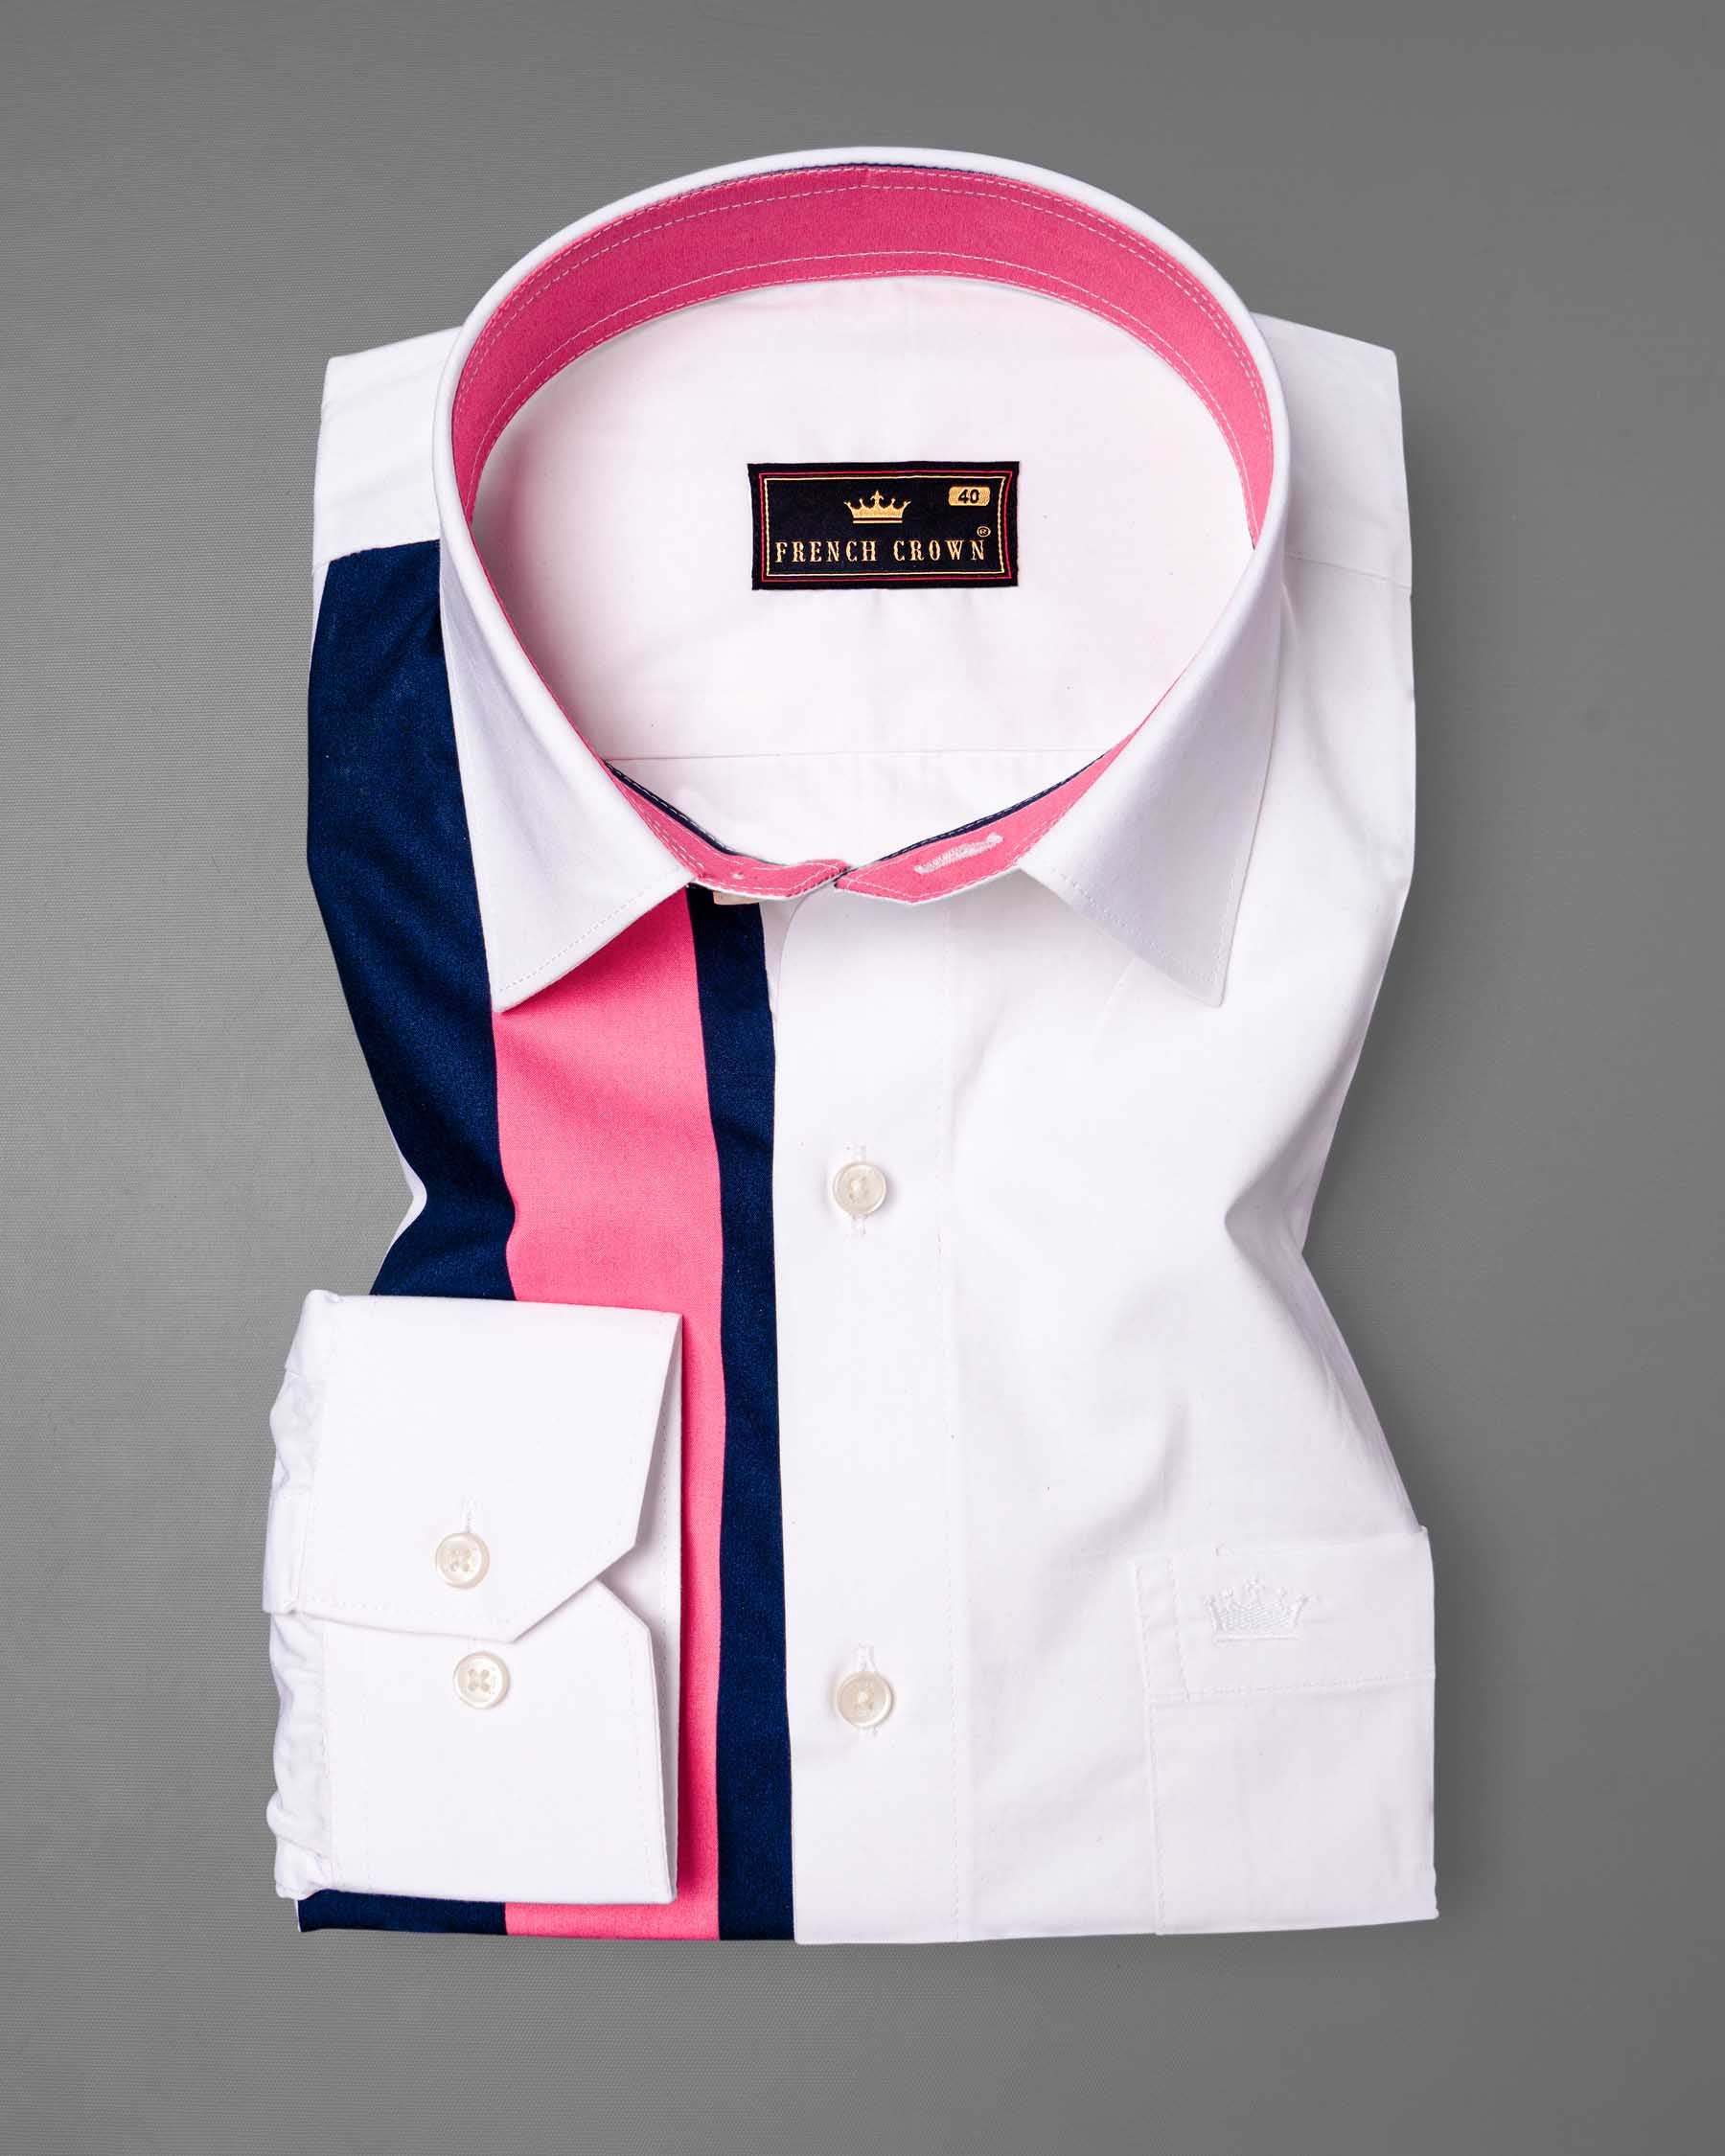 Bright White with Geraldine Pink and Sapphire Blue Premium Cotton Shirt 6347-38,6347-H-38,6347-39,6347-H-39,6347-40,6347-H-40,6347-42,6347-H-42,6347-44,6347-H-44,6347-46,6347-H-46,6347-48,6347-H-48,6347-50,6347-H-50,6347-52,6347-H-52